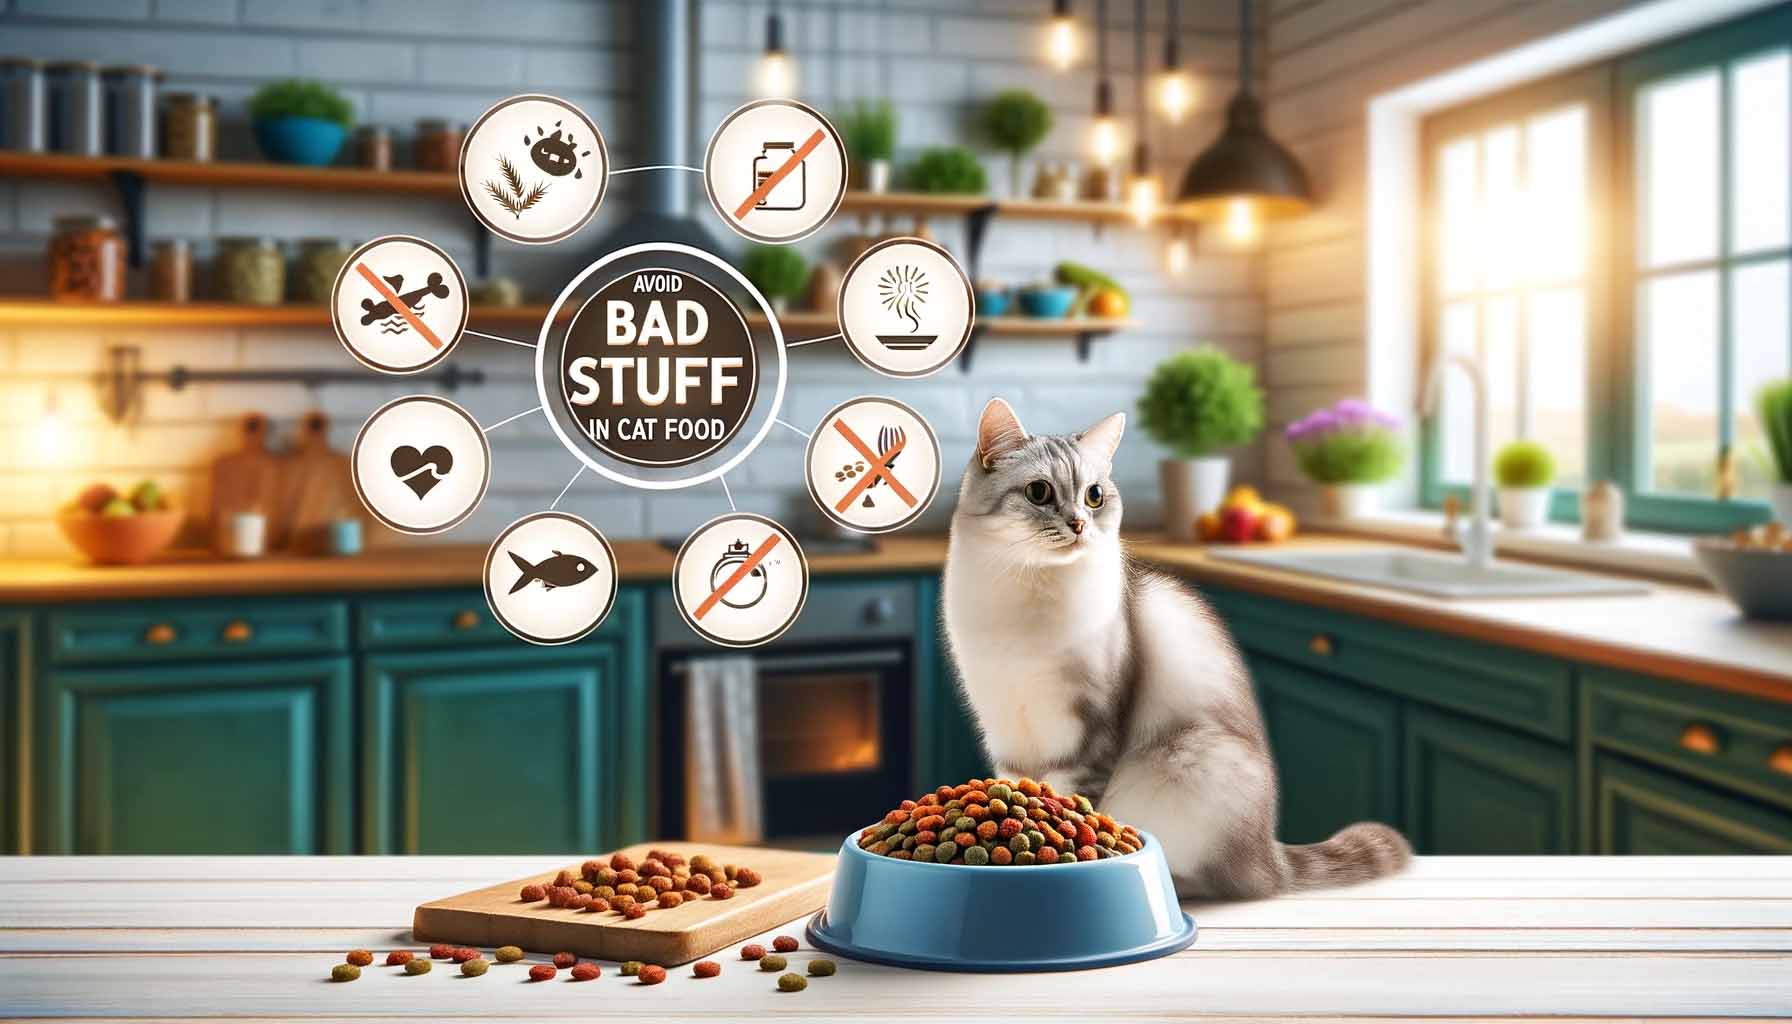 How to Avoid Bad Stuff in Cat Food